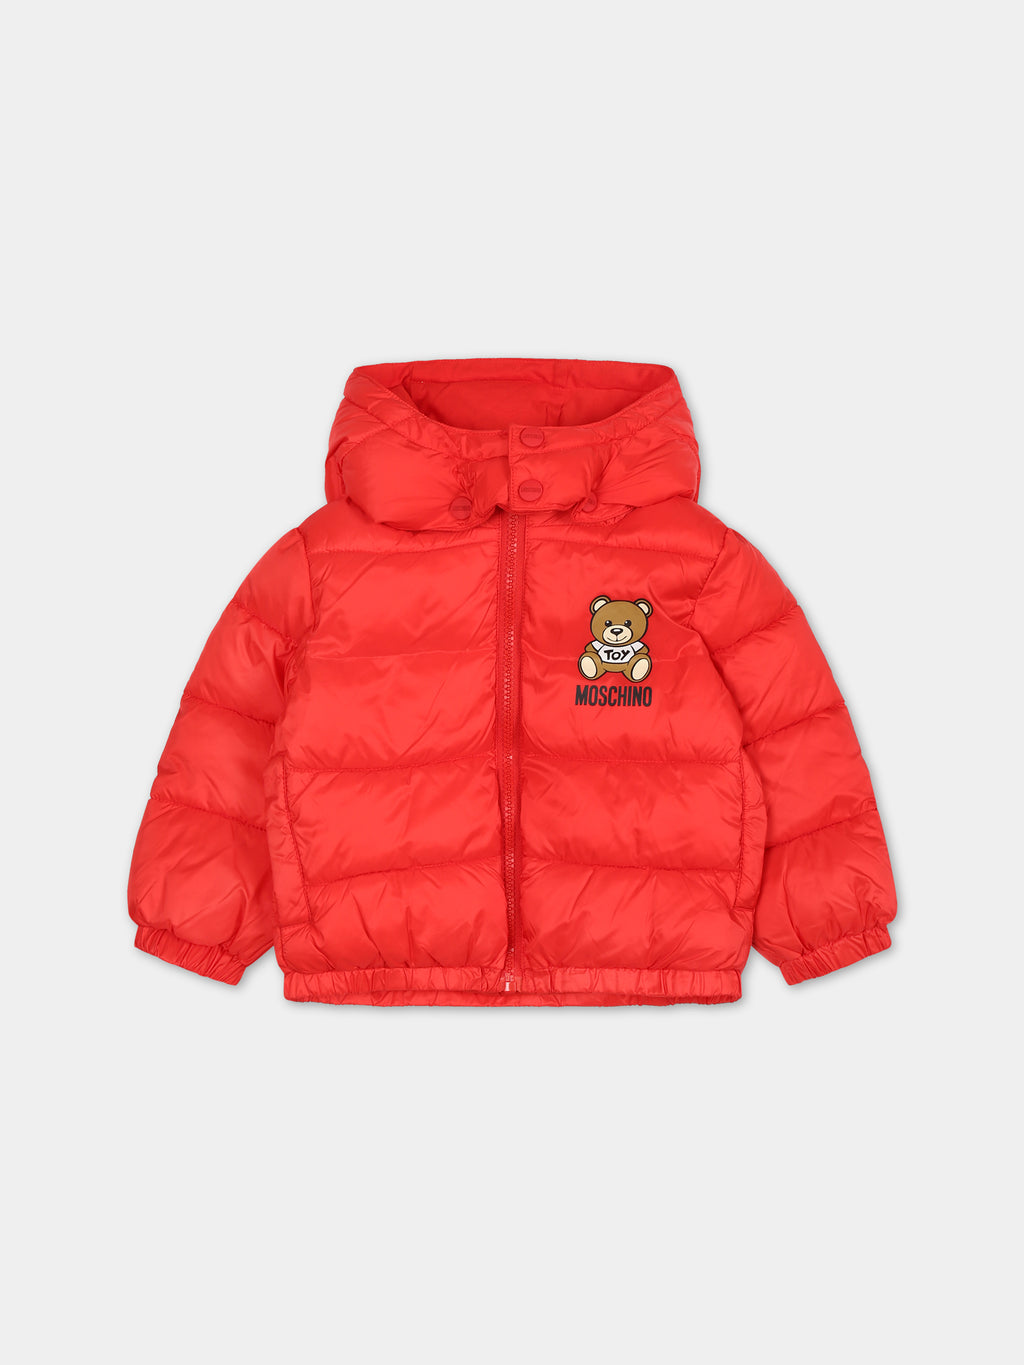 Red down jacket for babykids with Teddy Bear and logo